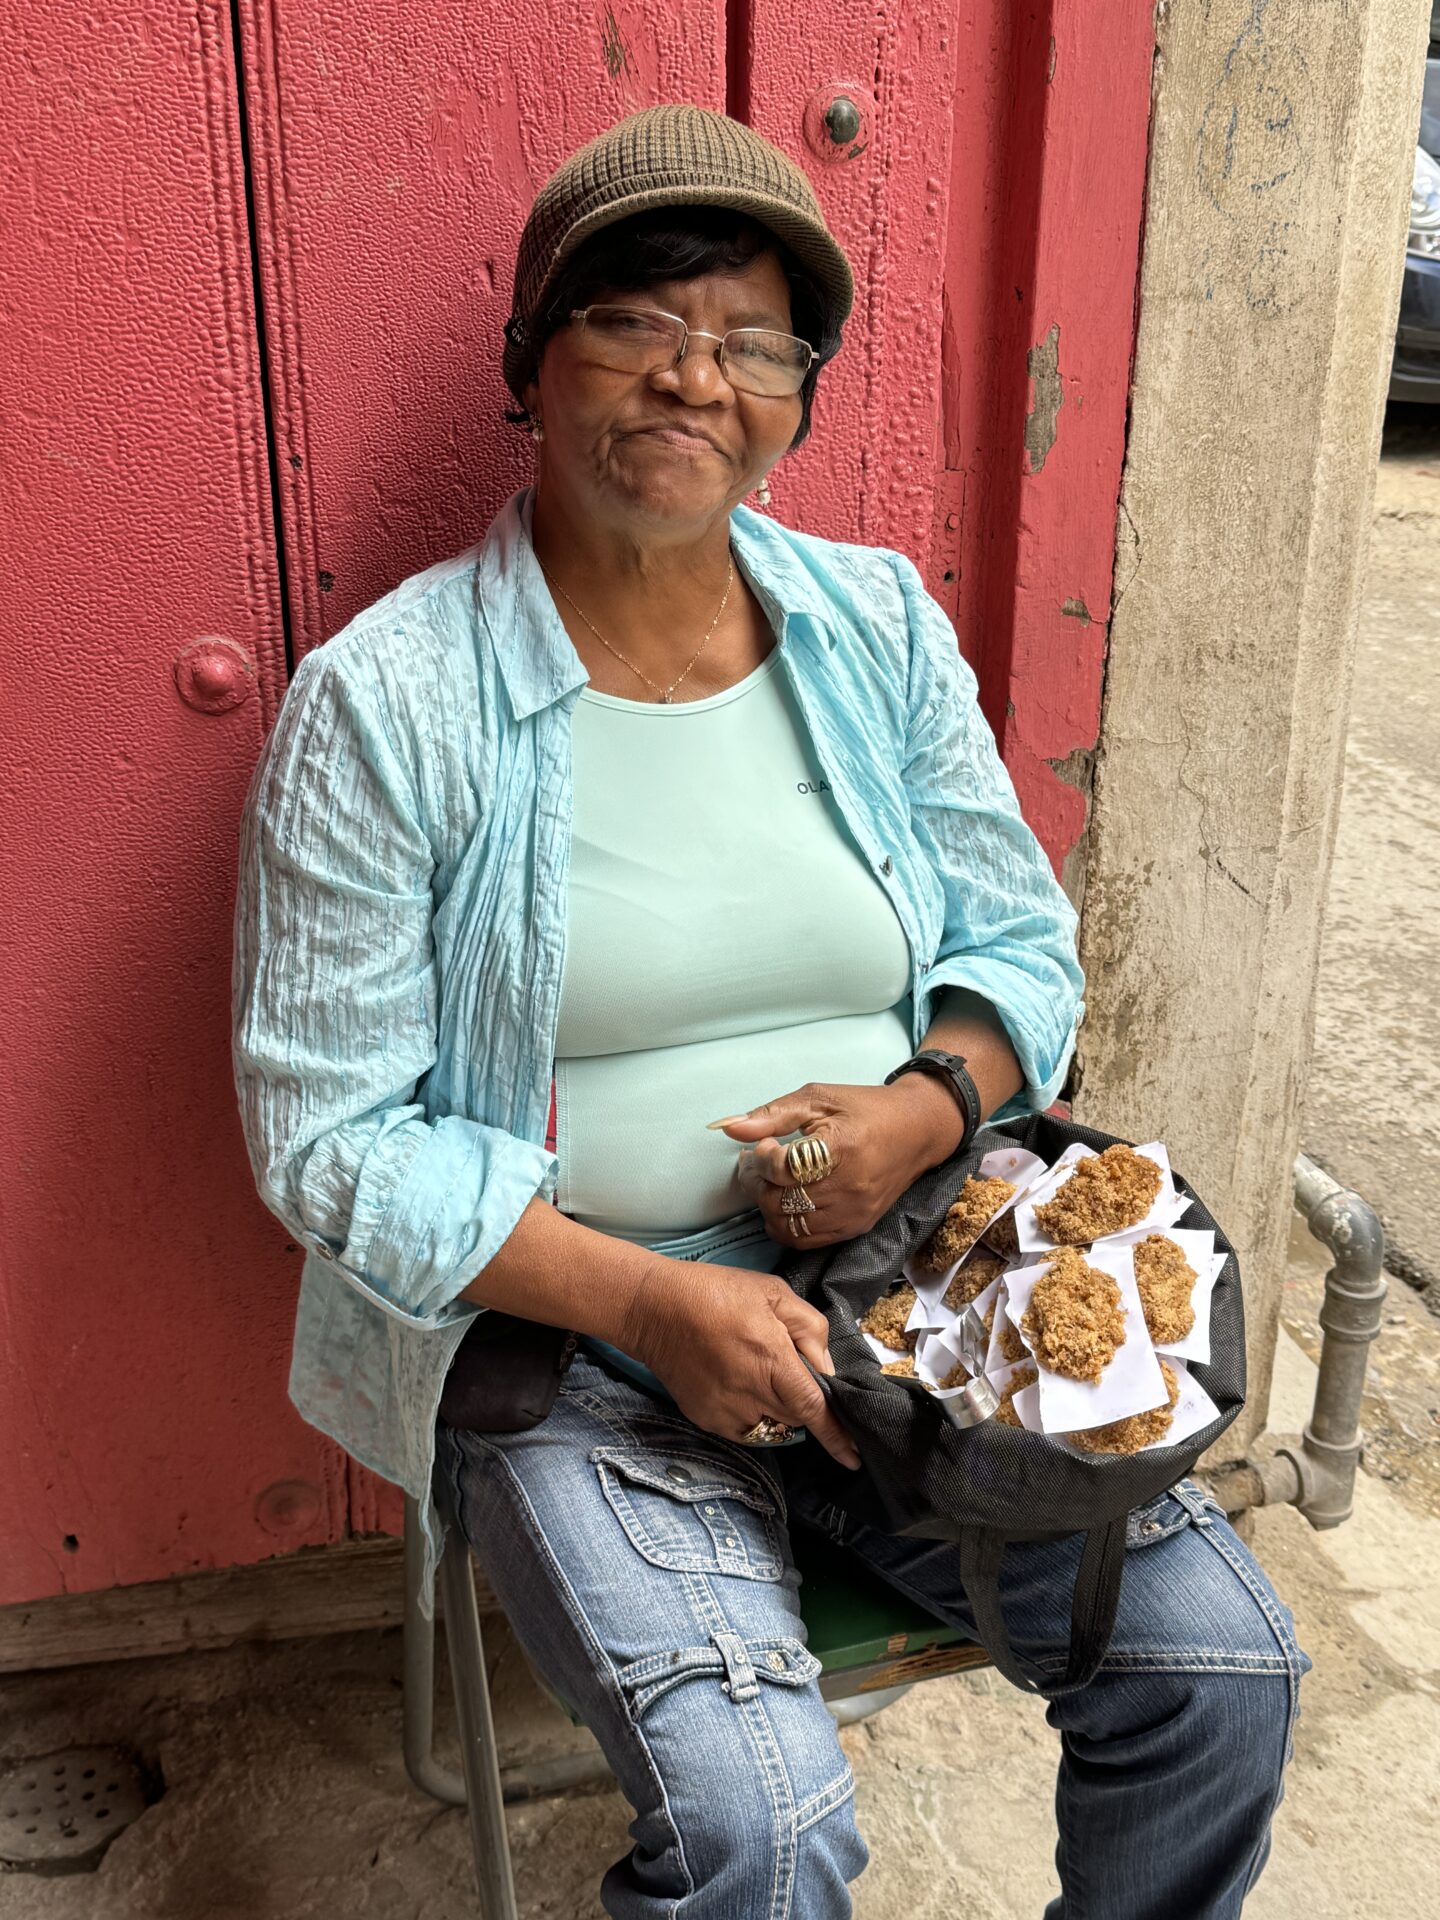 Woman selling sweets in the doorway of a building, Old Havana, Cuba, 2024, as photographed by Carol Schiraldi of Carol's Little World. 